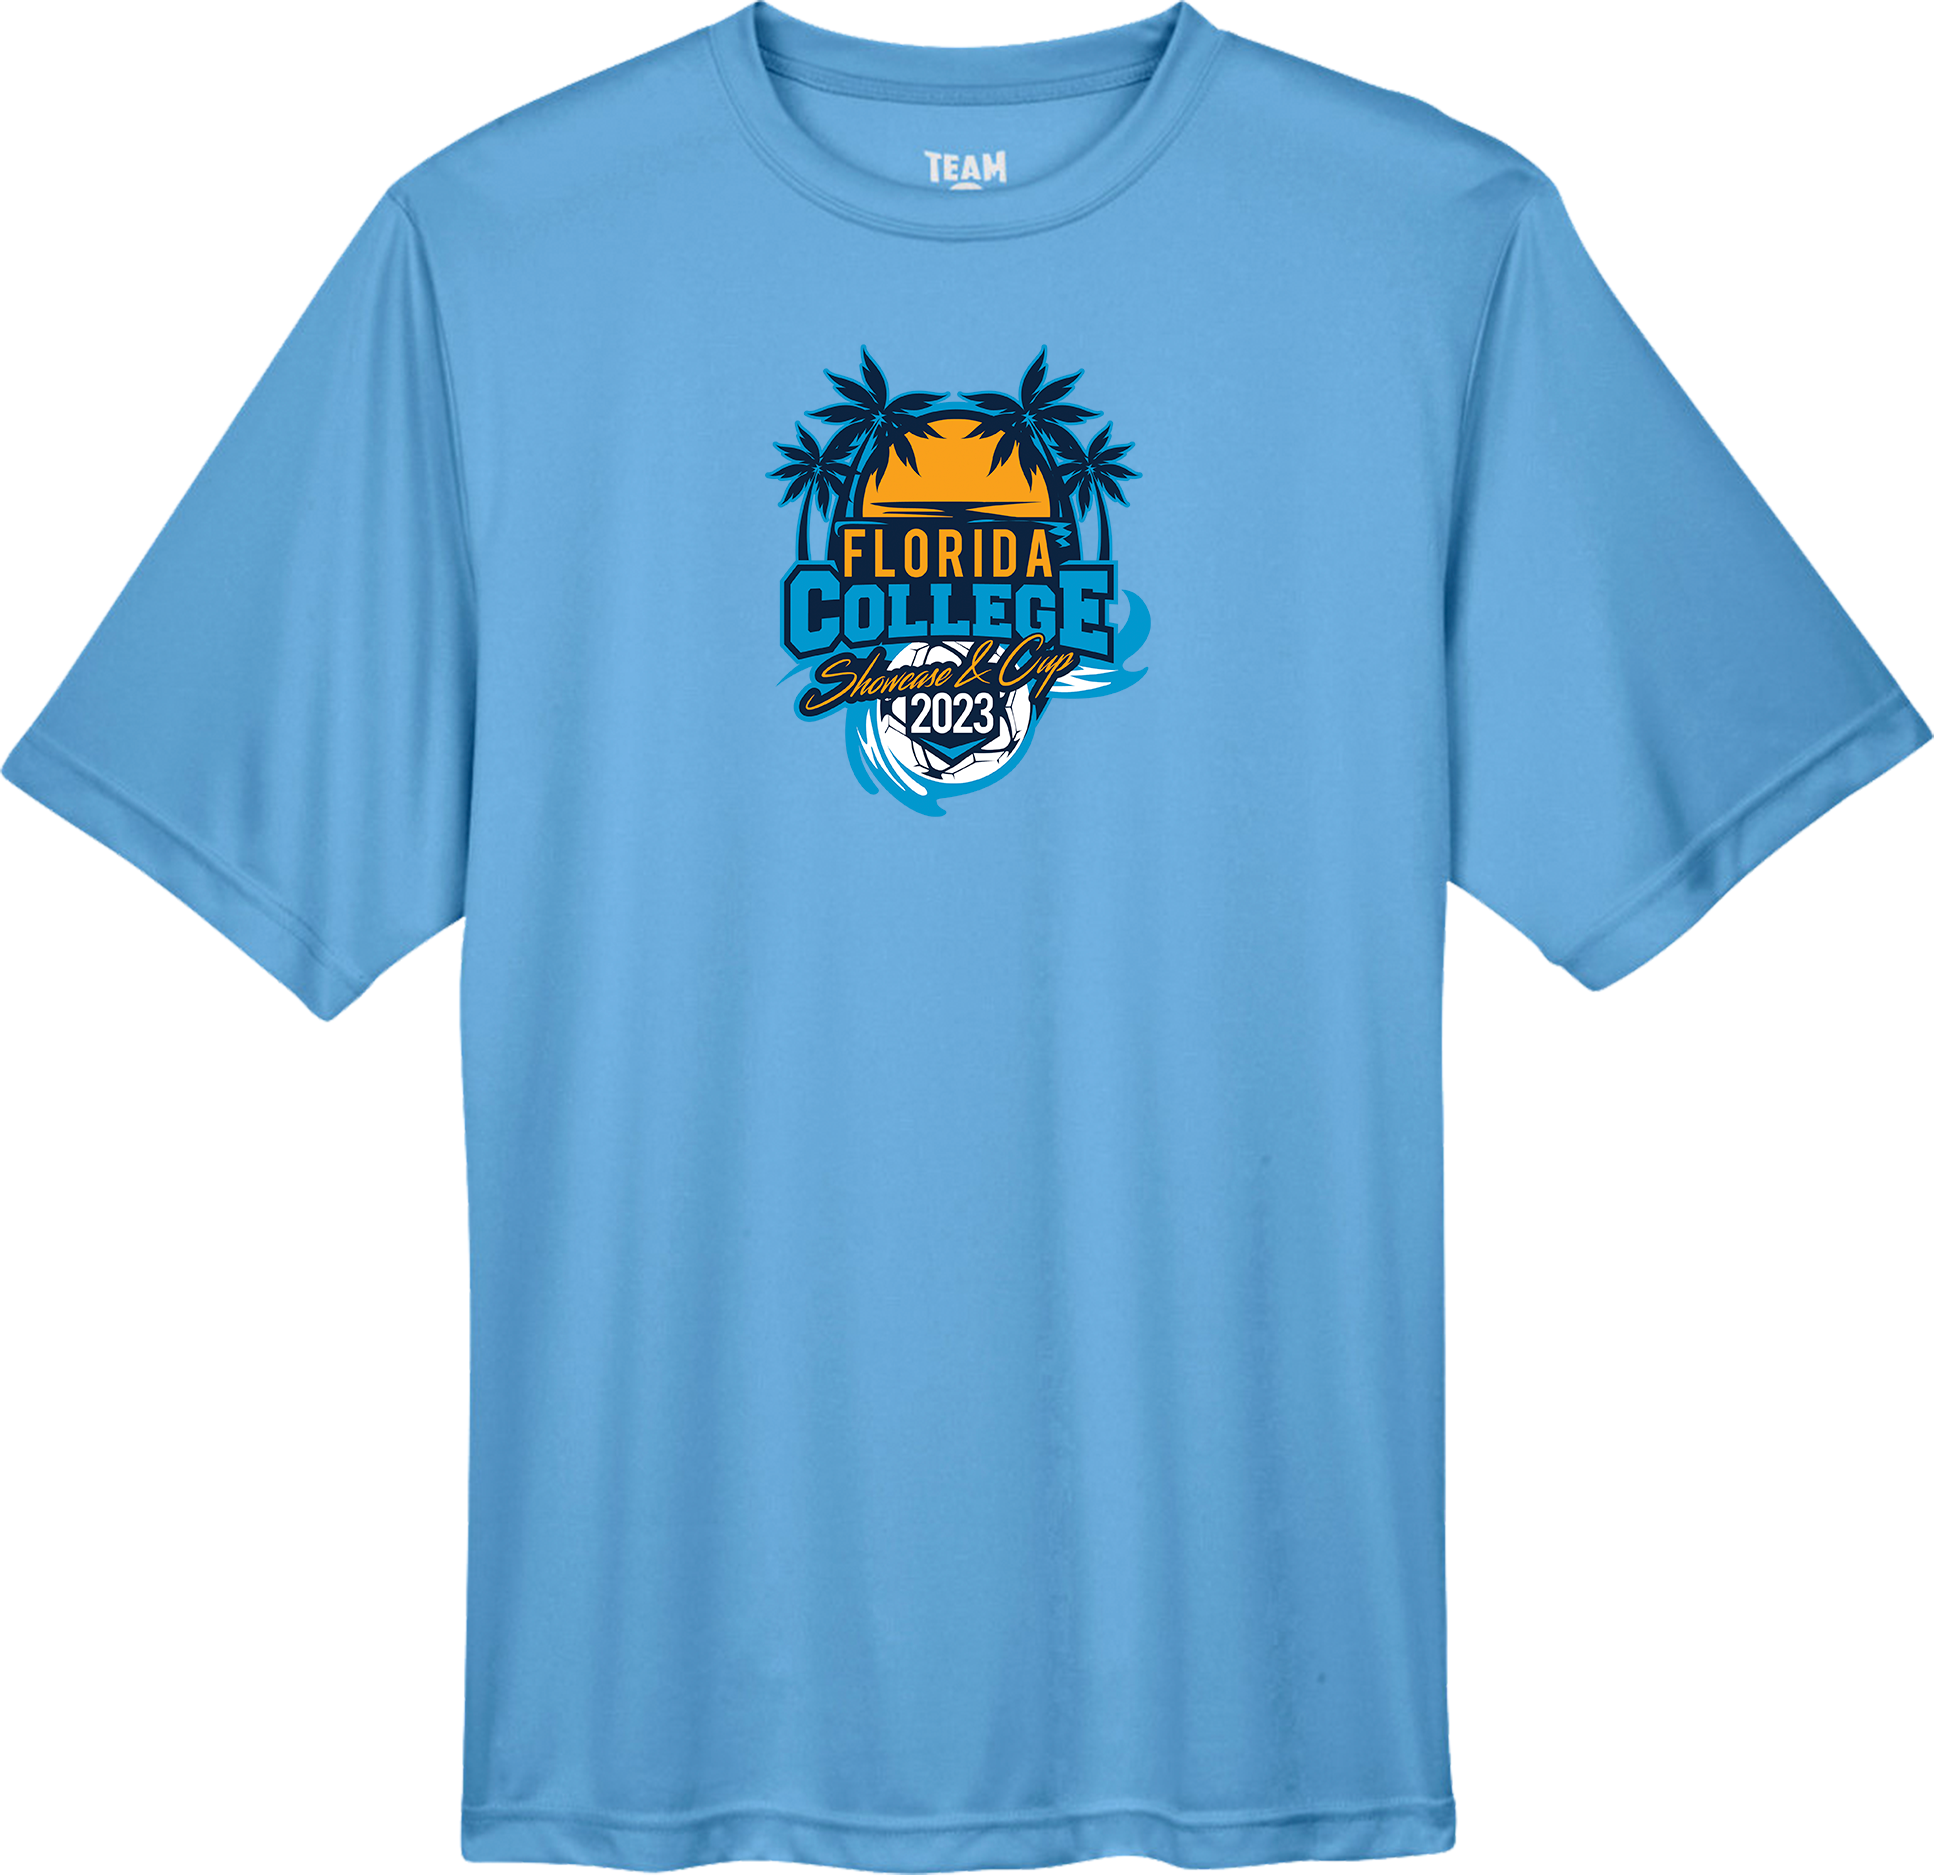 PERFORMANCE SHIRTS - 2023 Florida College Showcase and Cup